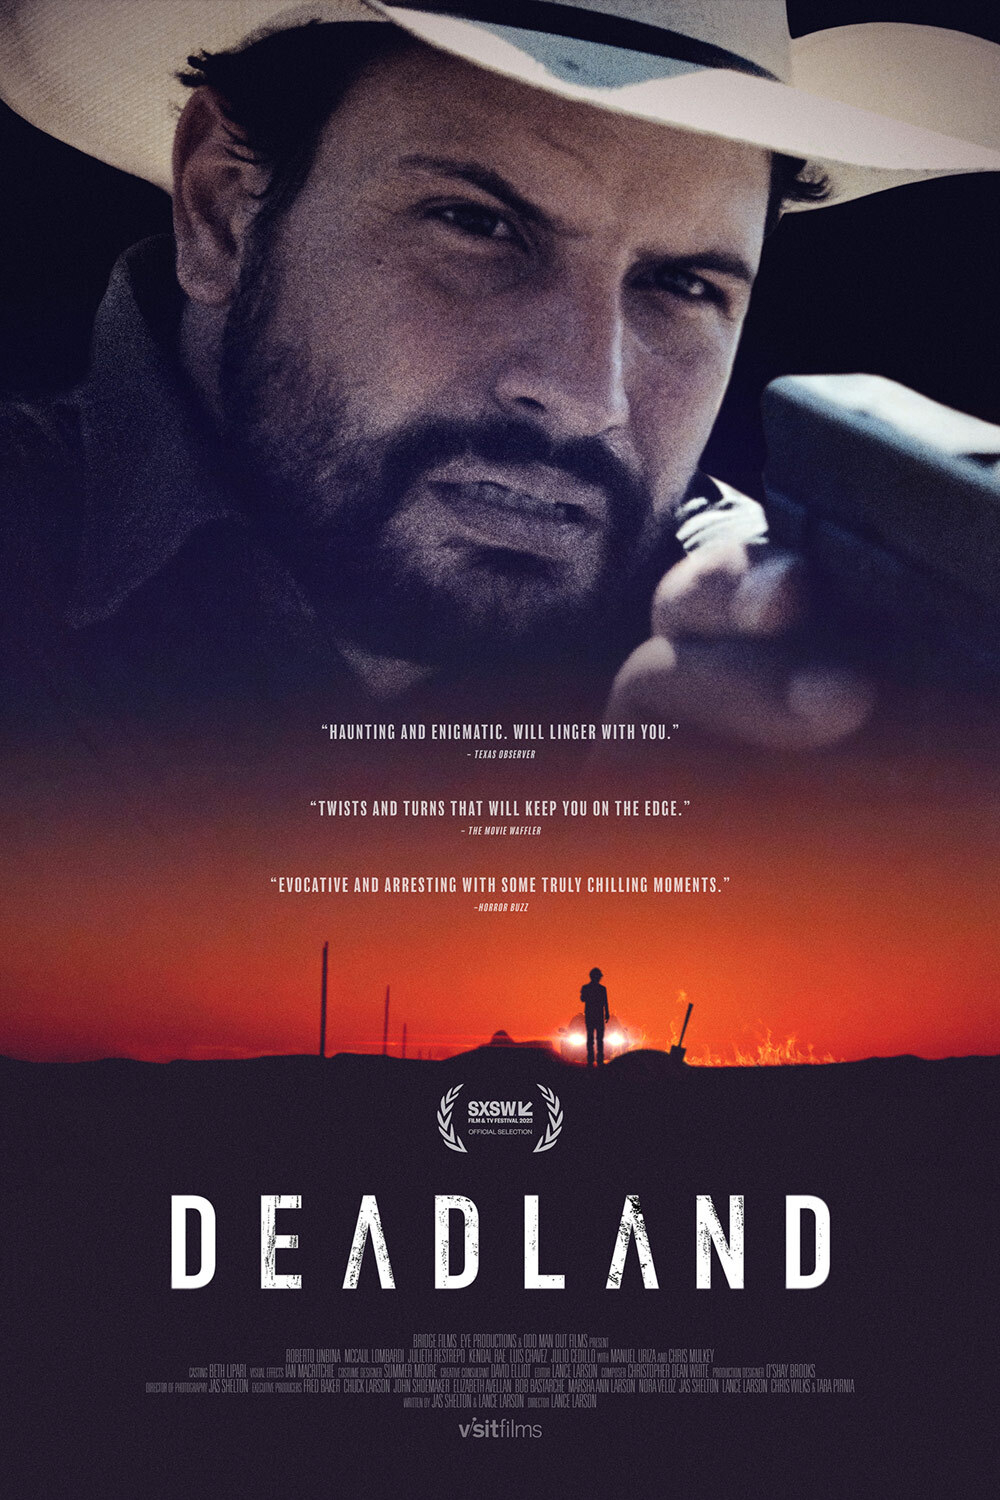 Movie poster for Deadland, man with cowboy hat holding a gun over a sunset